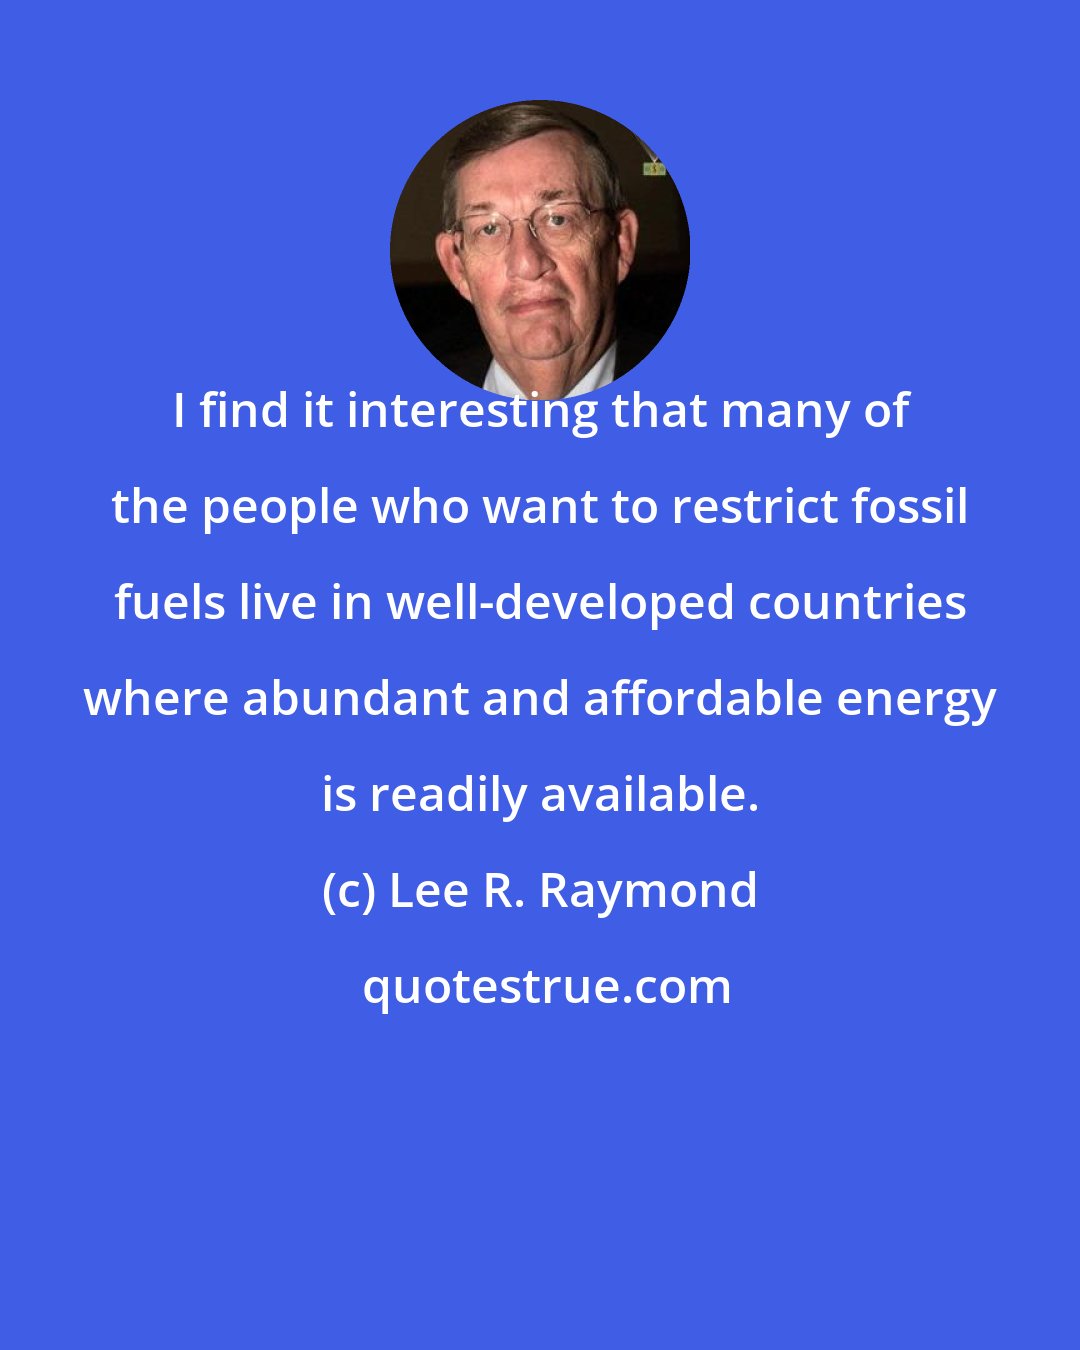 Lee R. Raymond: I find it interesting that many of the people who want to restrict fossil fuels live in well-developed countries where abundant and affordable energy is readily available.